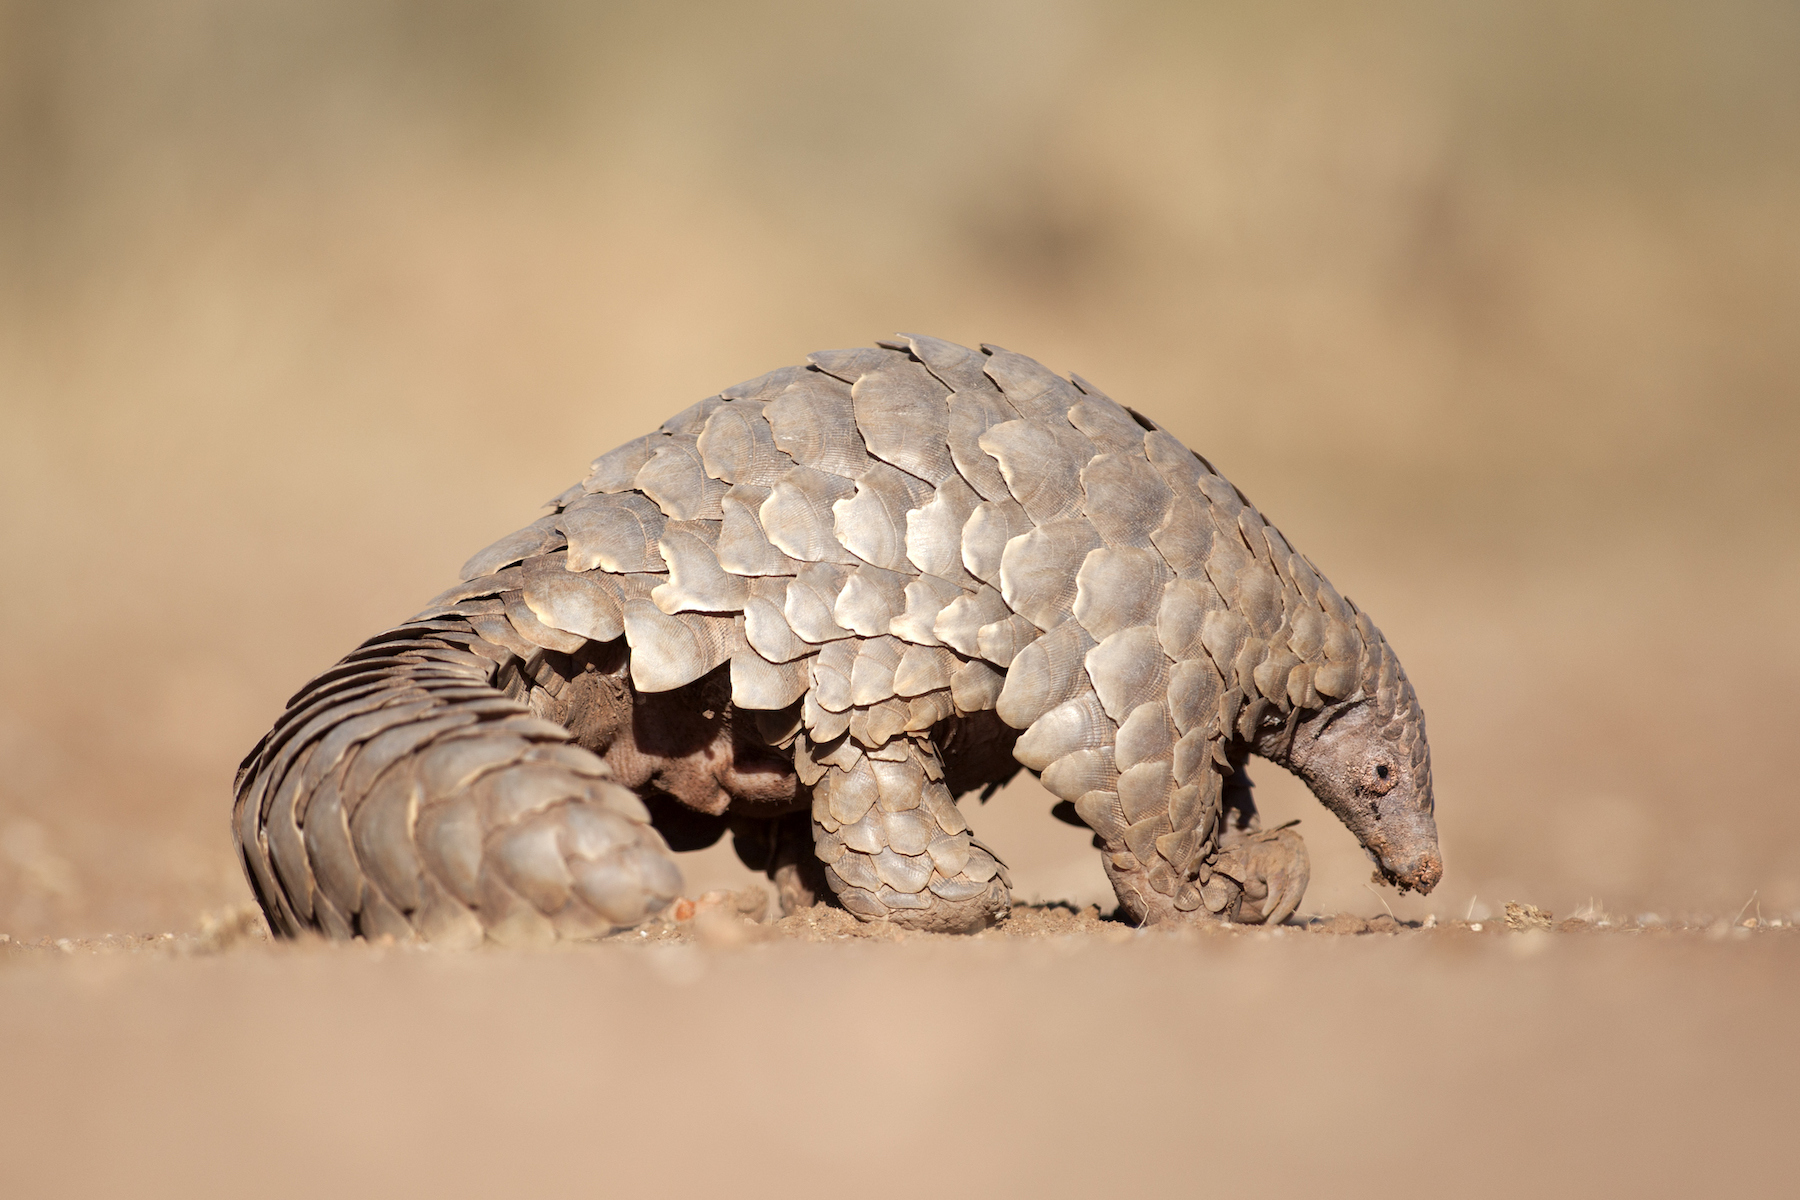 Rescued Pangolin released into the wild, marking World Pangolin Day